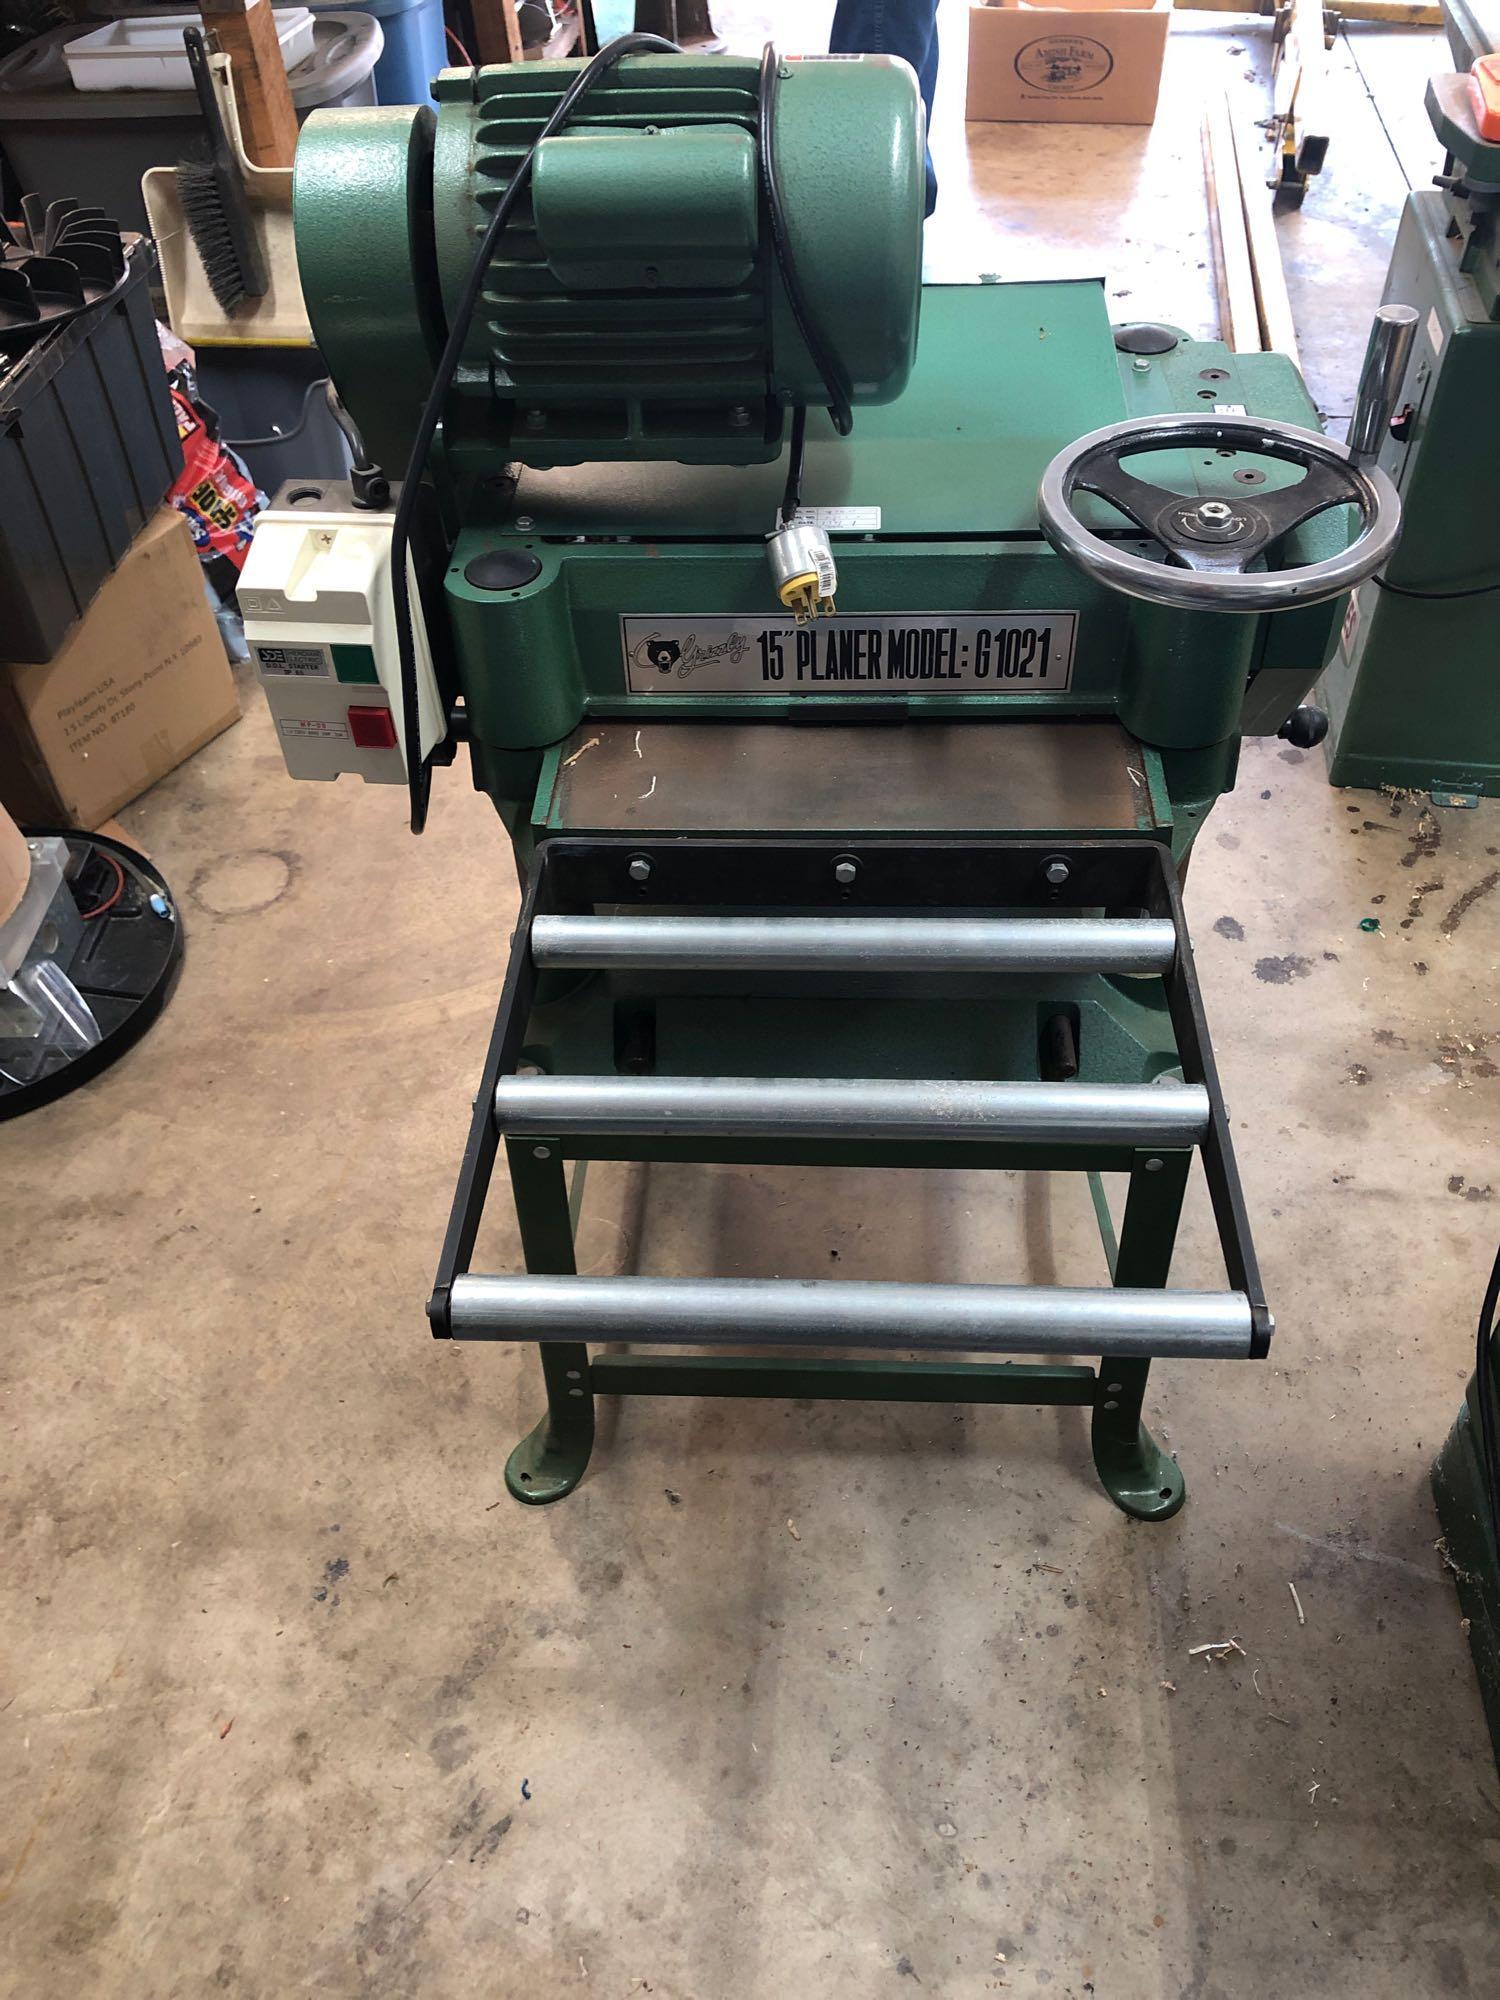 1997 Grizzly 15 inch planer model G1021 | Proxibid